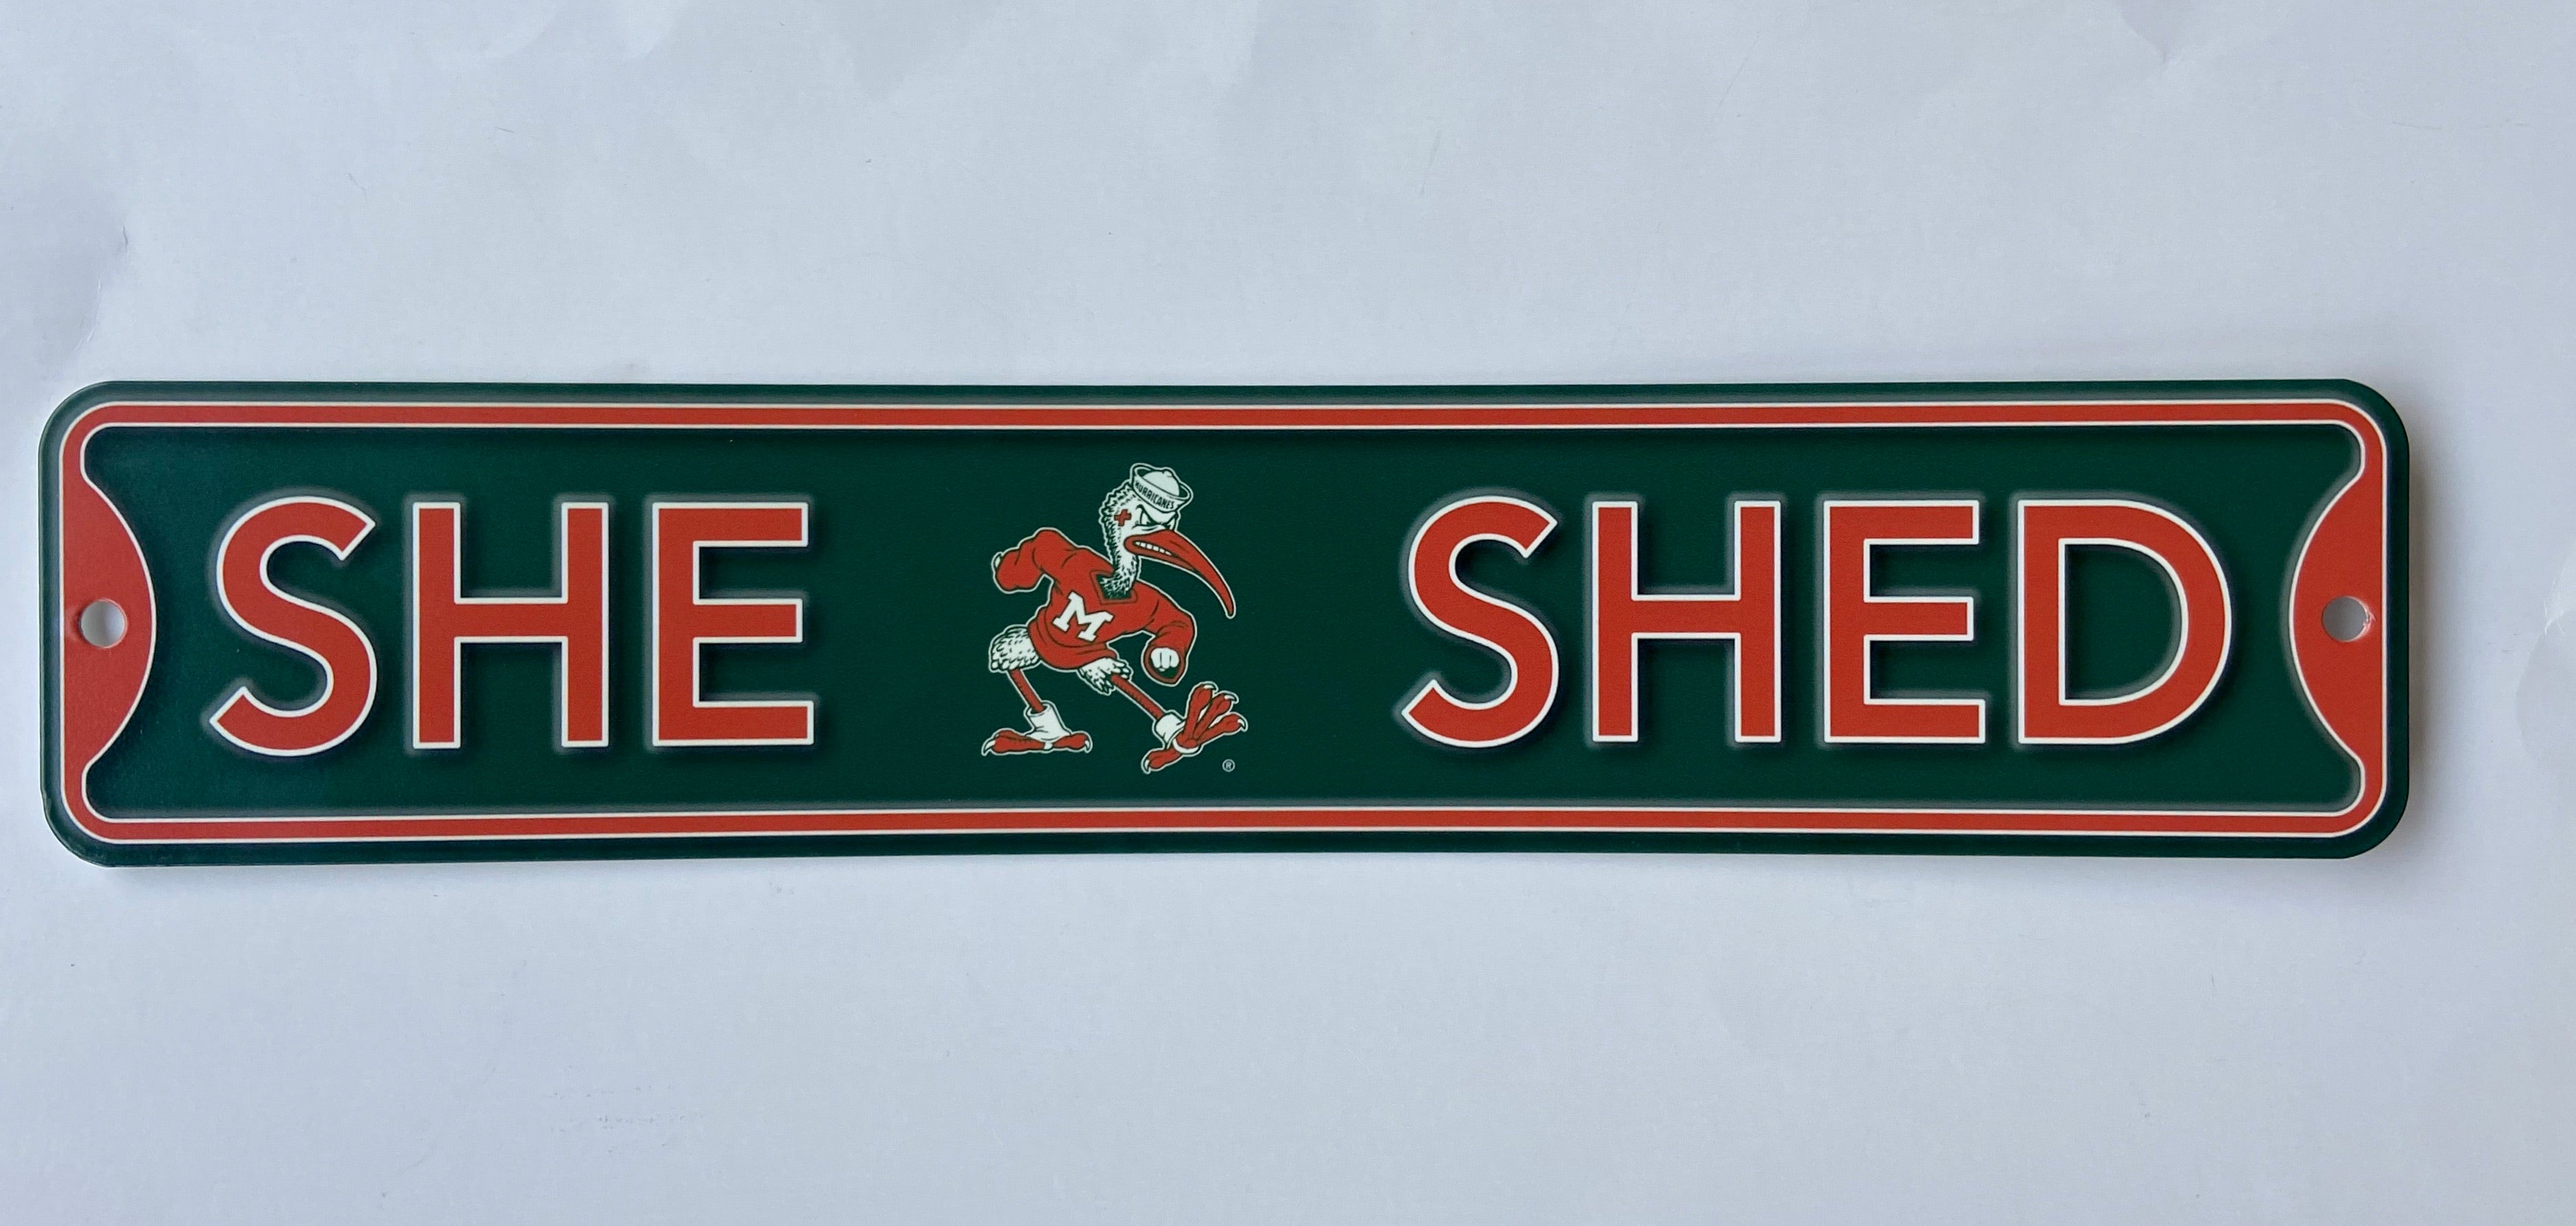 Miami Hurricanes "She Shed" Authentic Street Sign - 3 1/2" x 16"